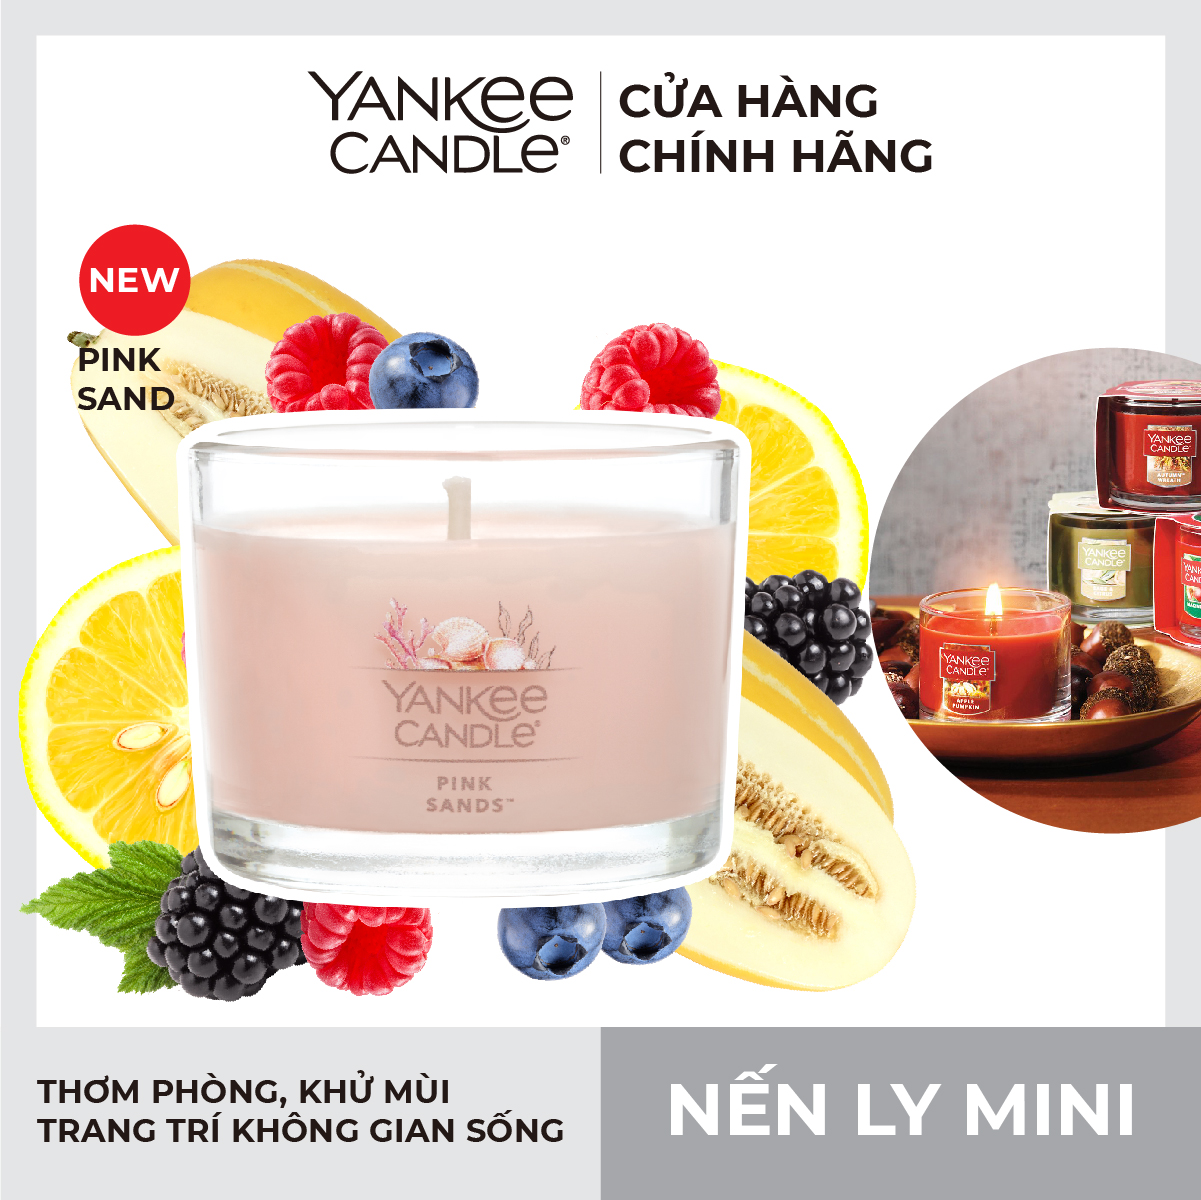 Nến ly mini Yankee Candle - Pink Sands